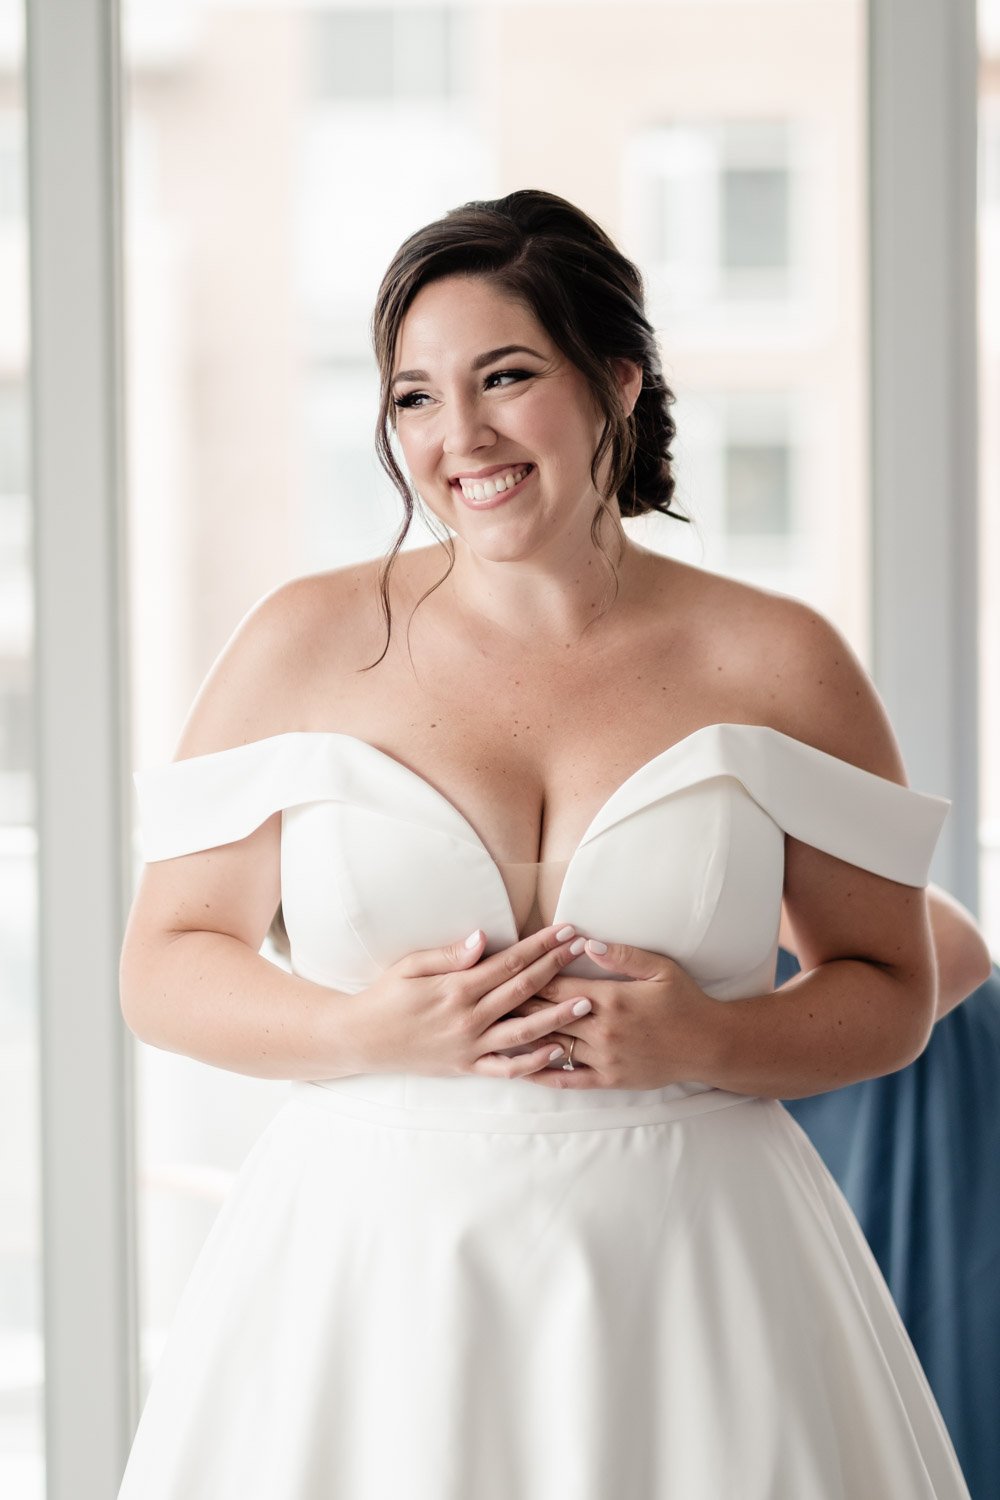 photo of an ottawa bride getting her dress on